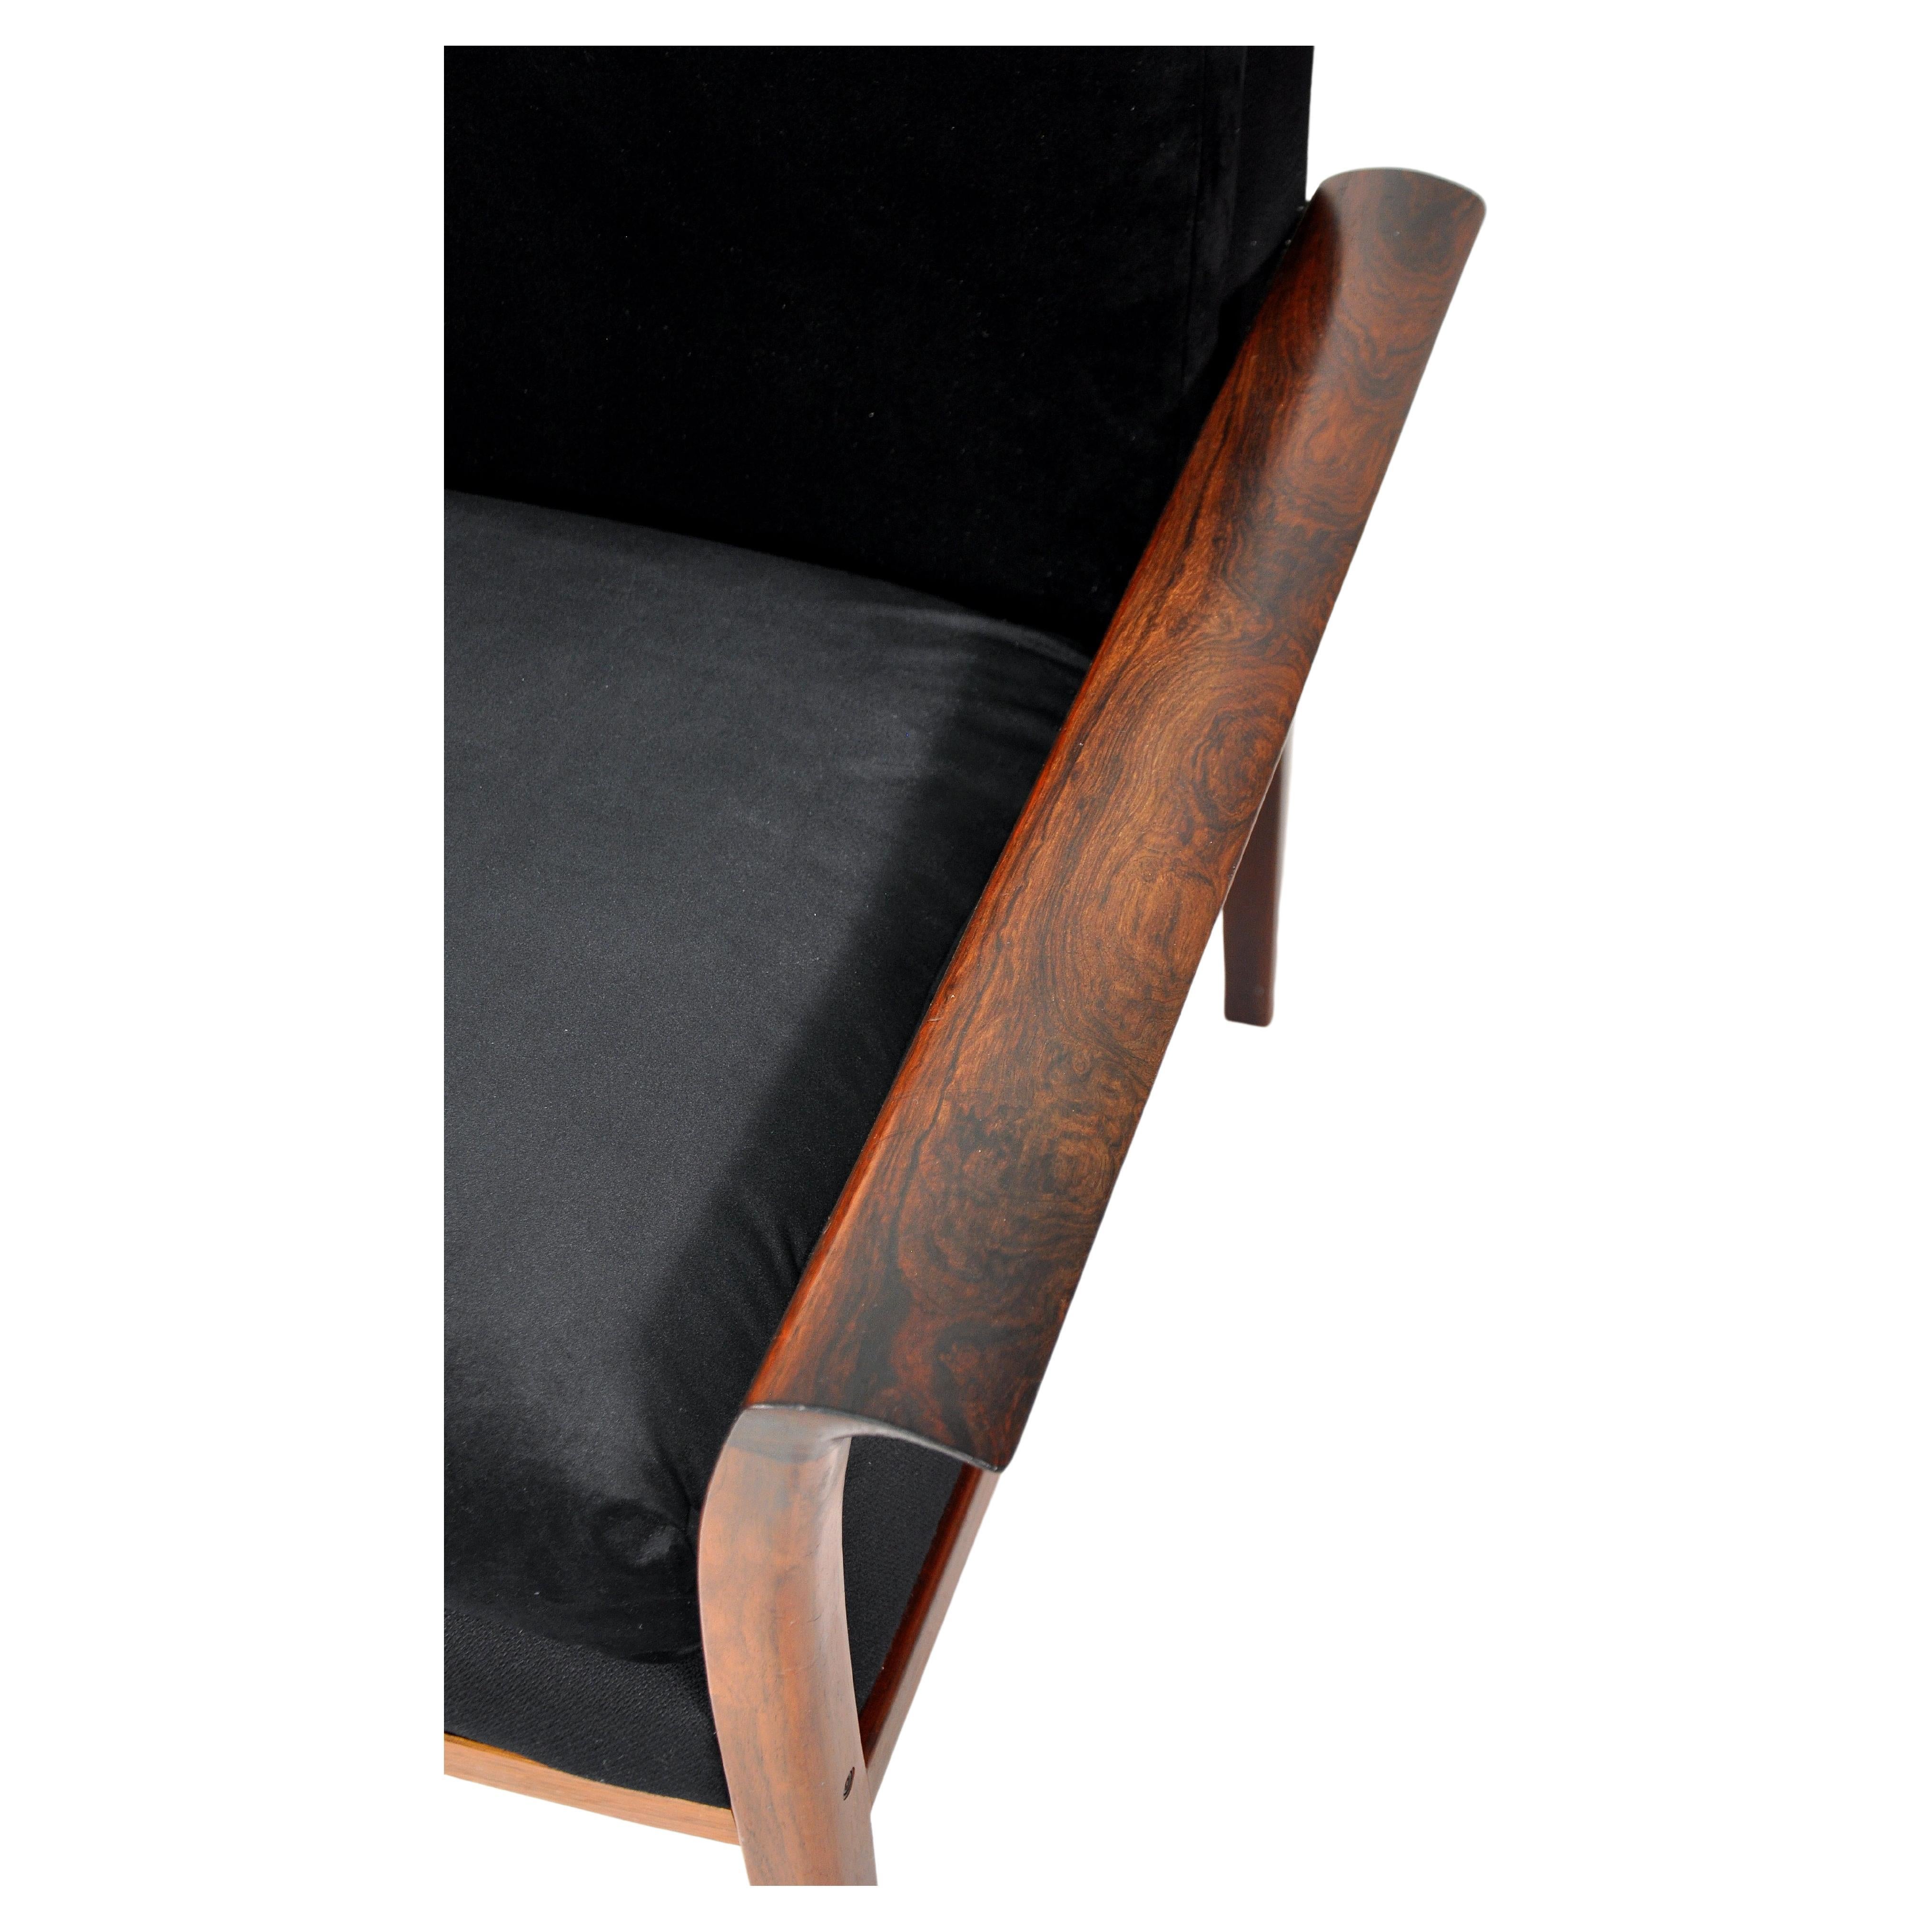 20th Century Pair of Brazilian Rosewood Black Armchairs by Fredrik Kayser for Vatne Mobler